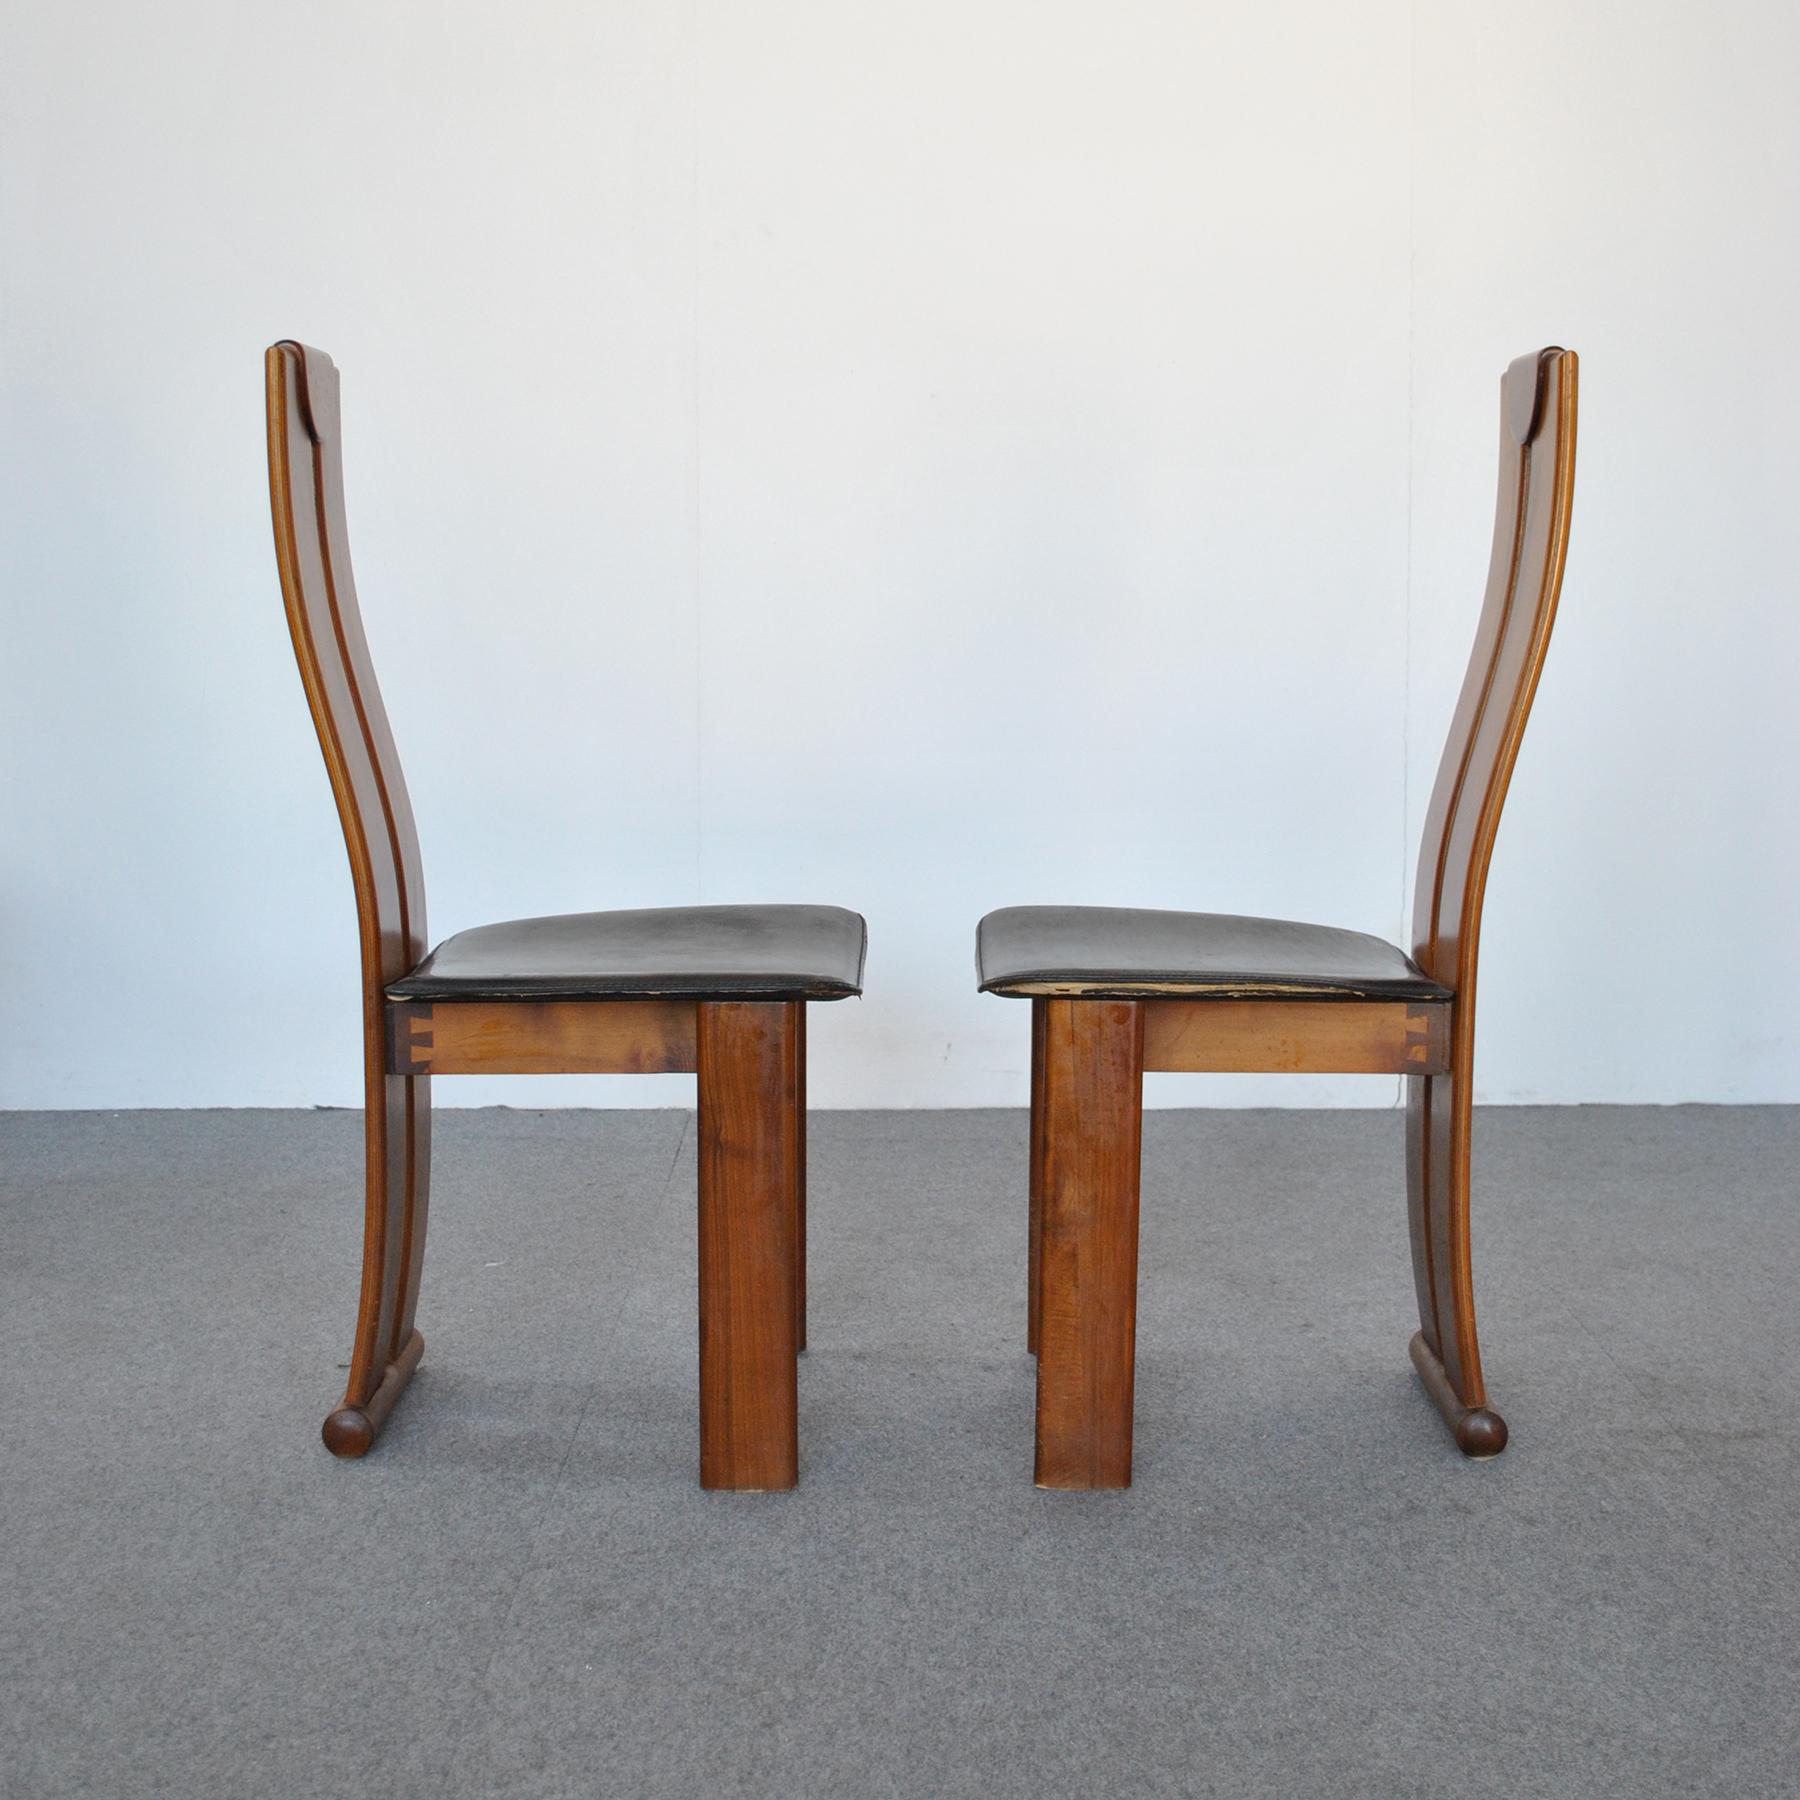 Leather Afra & Tobia Scarpa in the Manner Set of Four Chairs